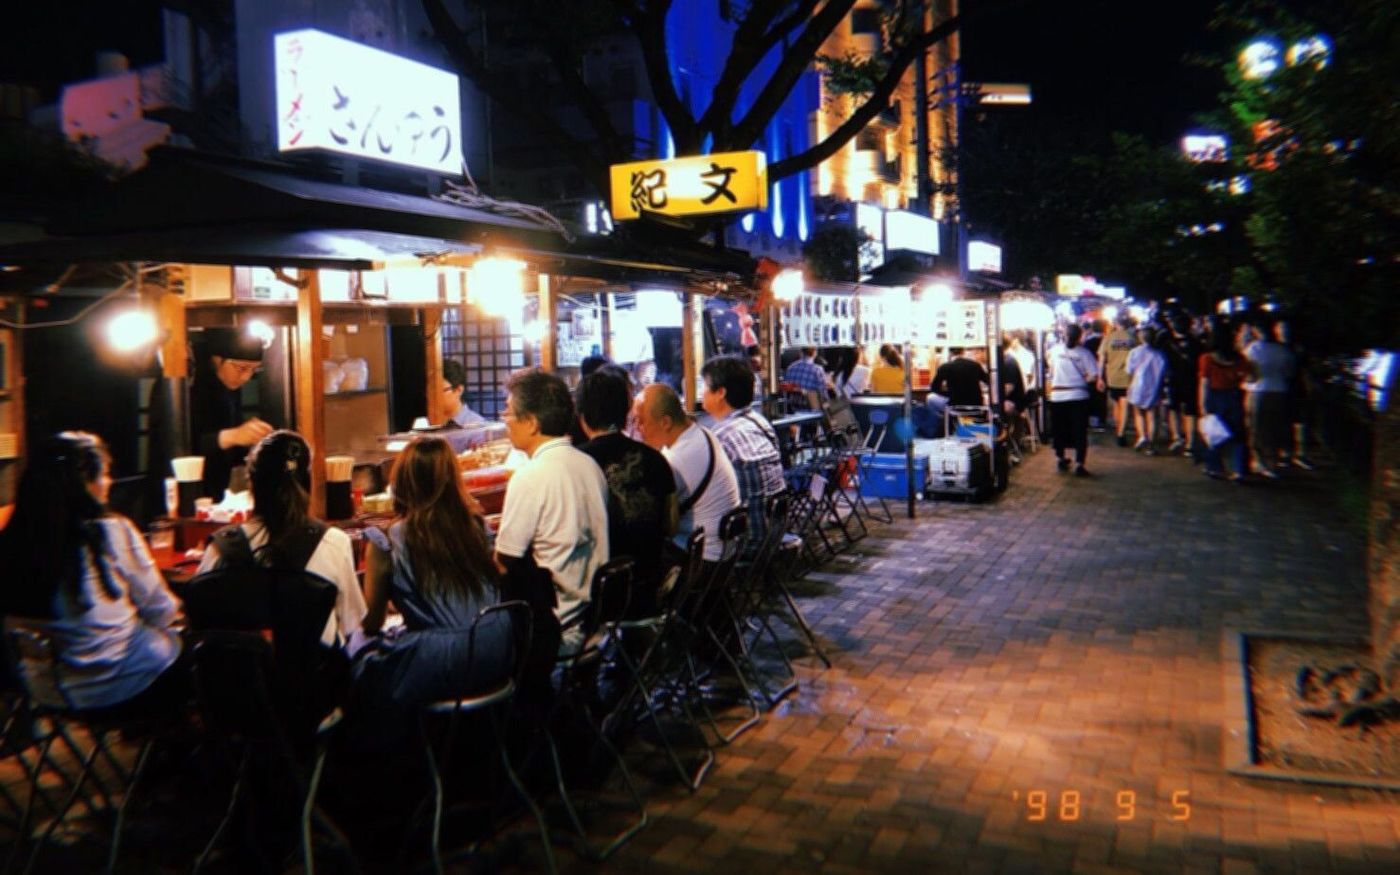 A photo of Yatai in Fukuoka. It's late at night, and the signs of many food stands illuminate the sidewalk. There's many patrons at each stand.